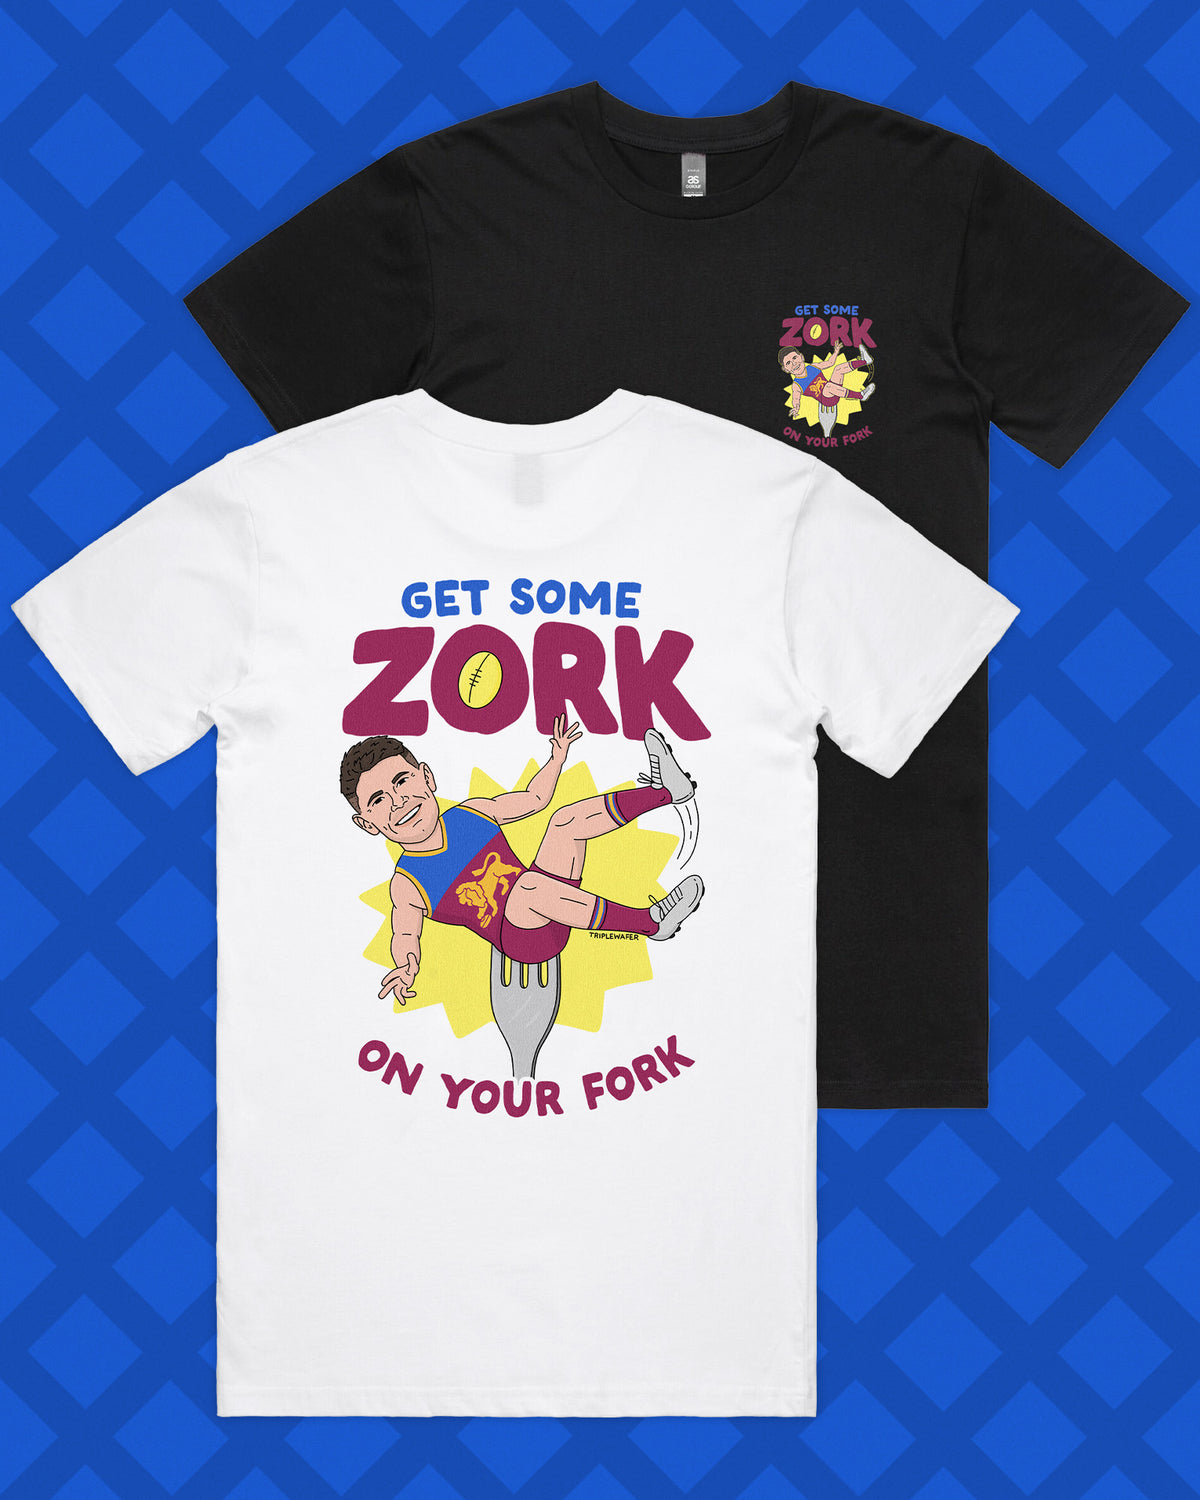 ZORK ON YOUR FORK TEE